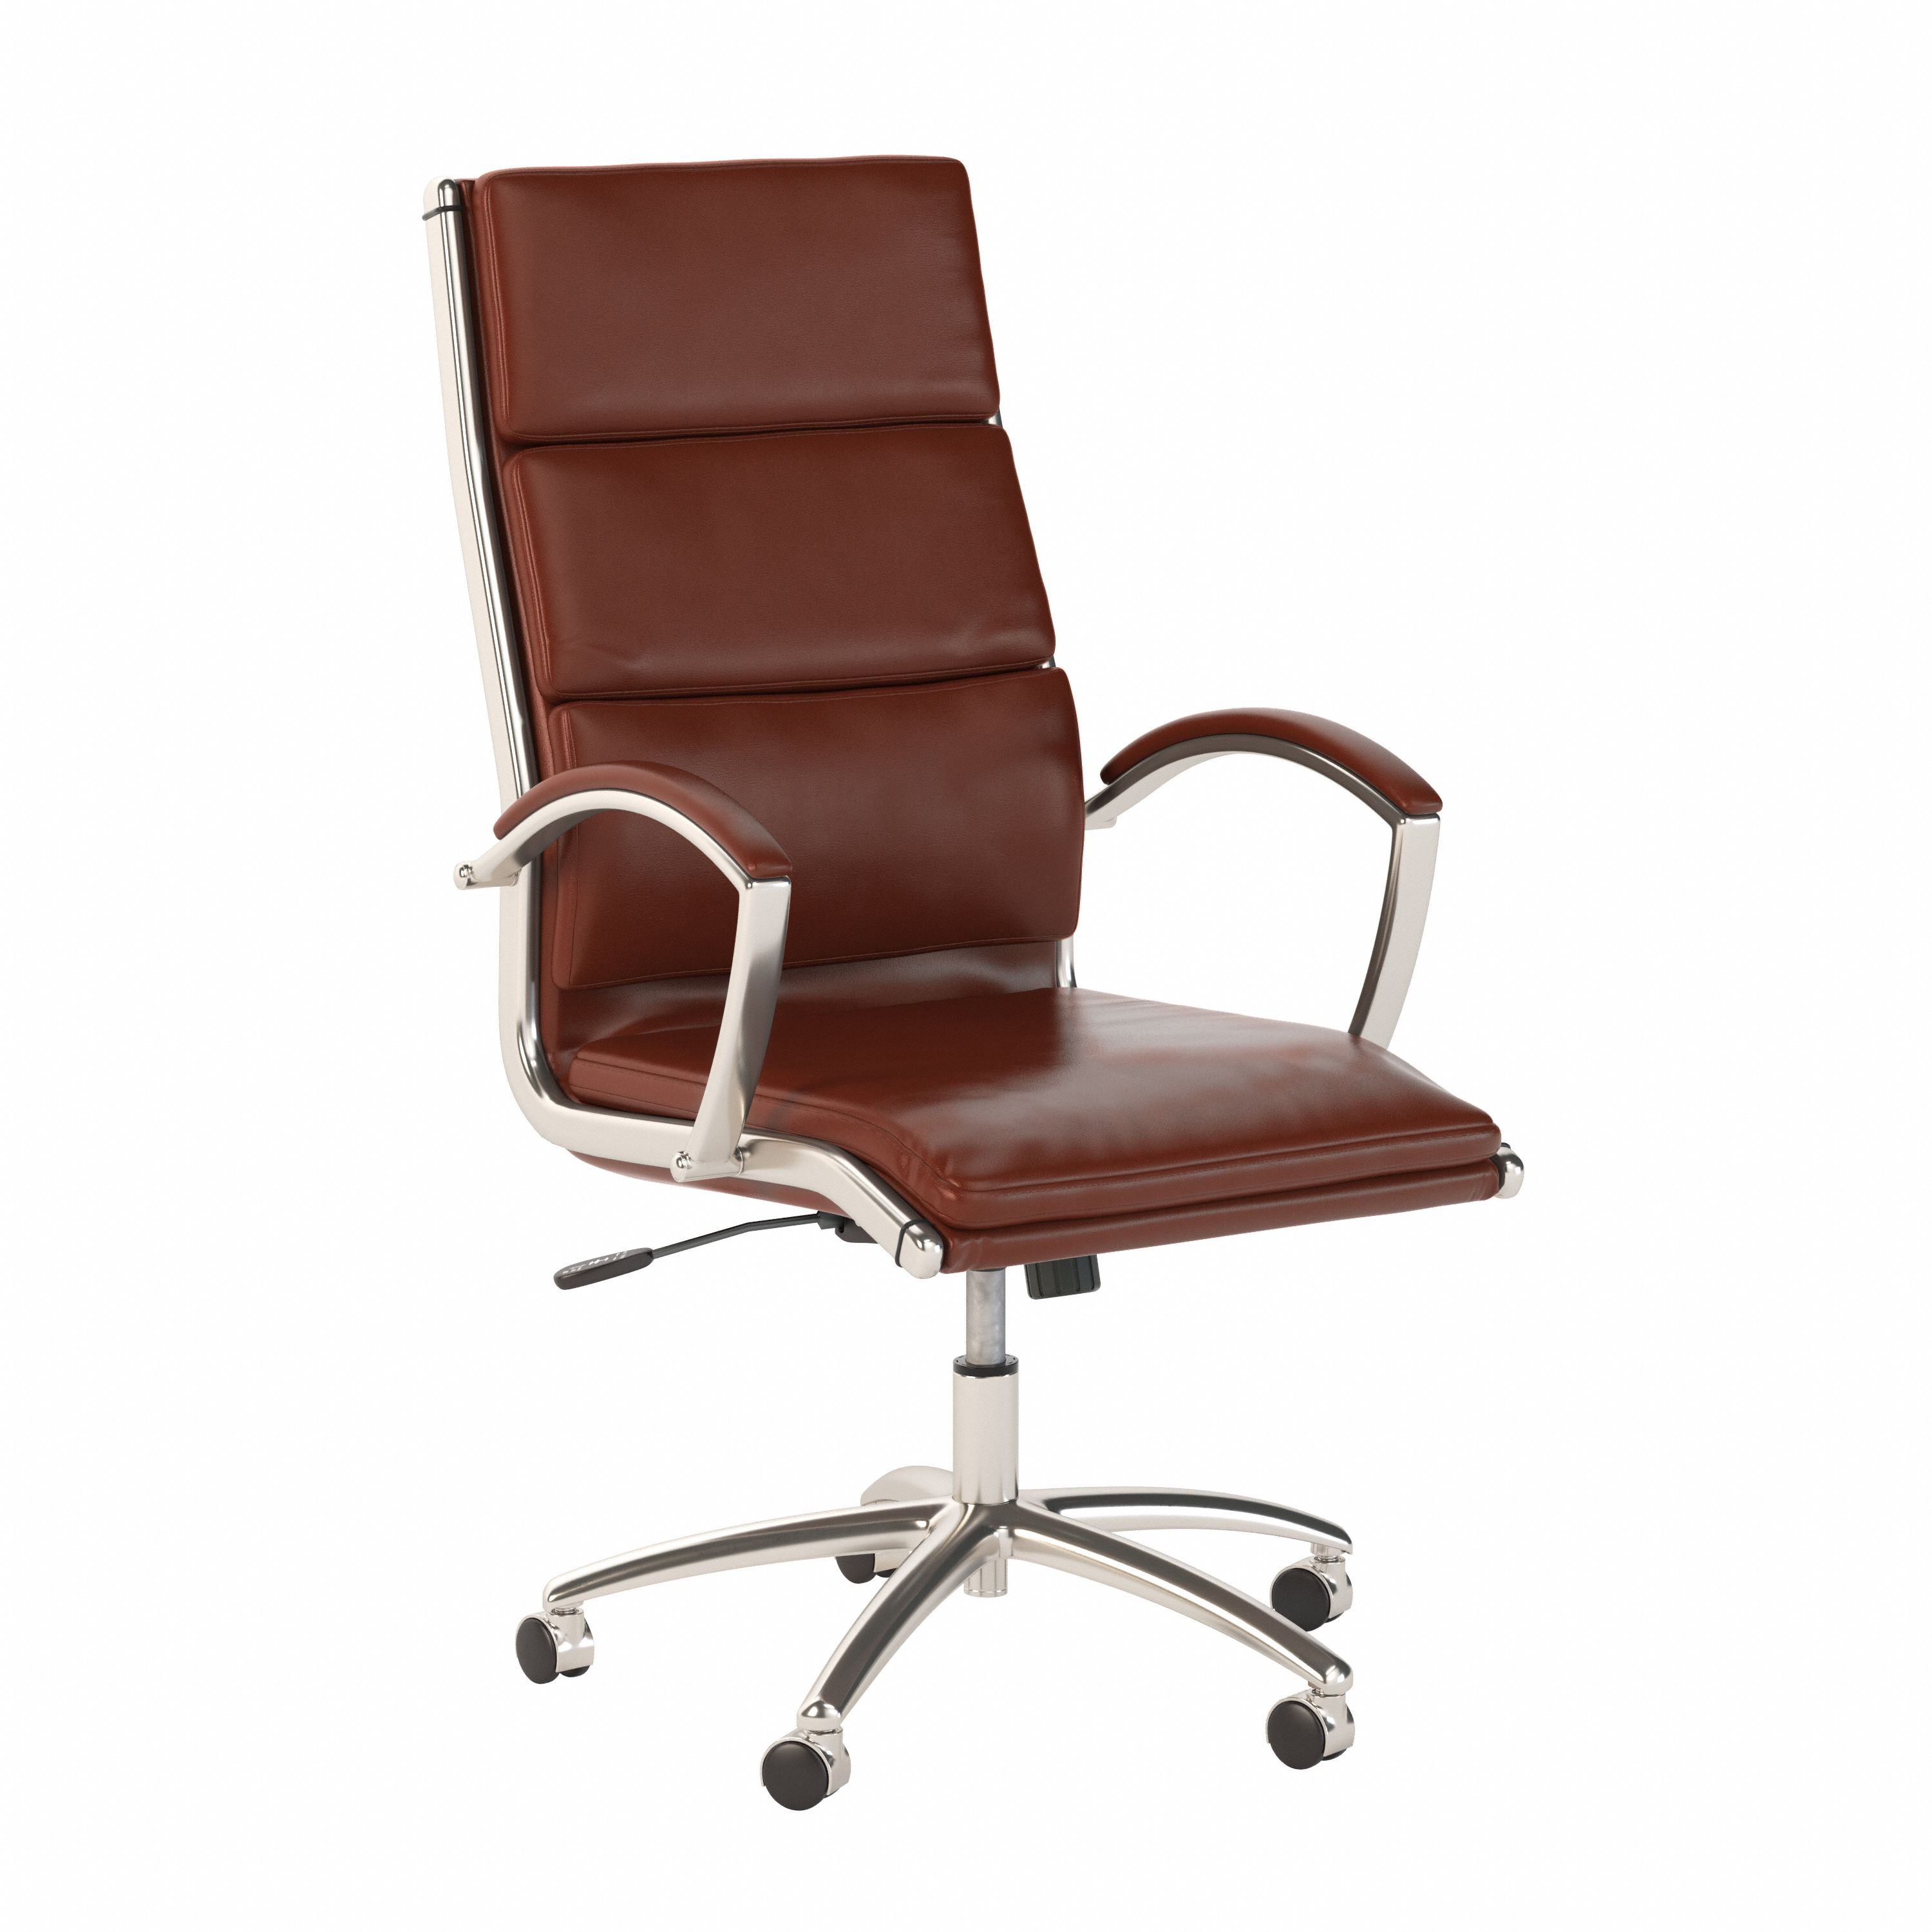 Shop Bush Business Furniture Modelo High Back Leather Executive Office Chair 02 CH1701CSL-03 #color_harvest cherry leather